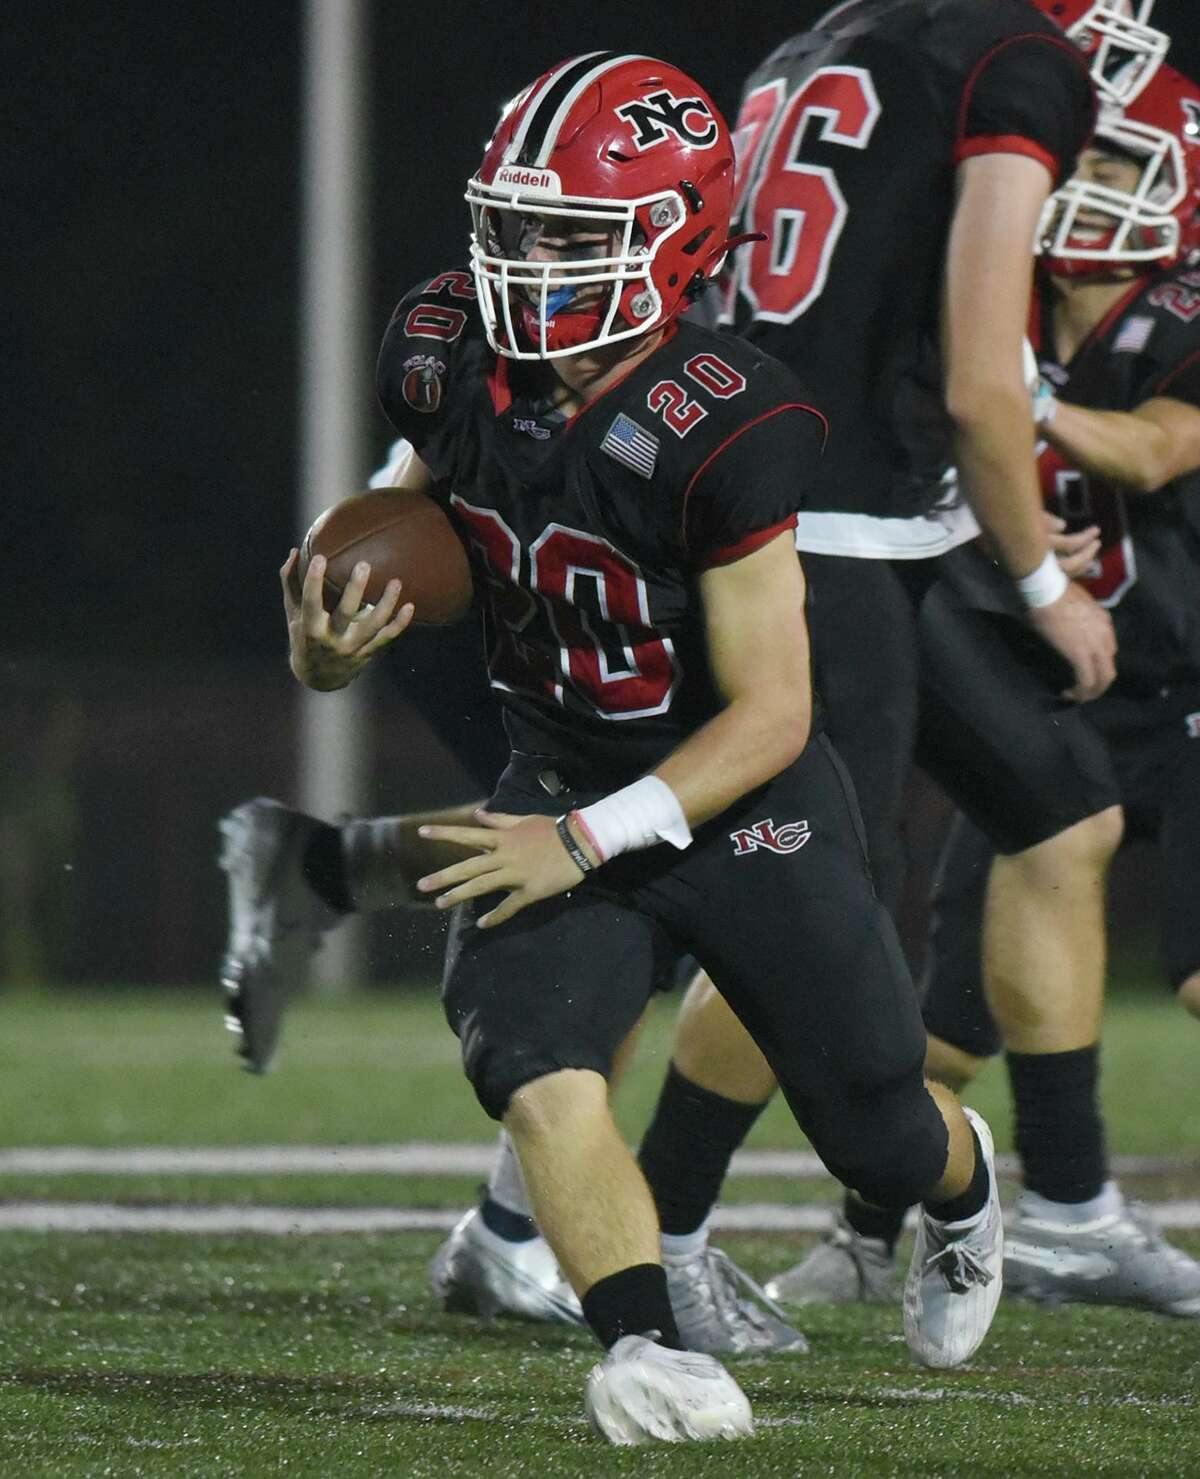 New Canaan's Conor Bailey (20) runs for a few yards against Brien McMahon during a football game at Dunning Field in New Canaan on Friday, Sept. 17, 2021.